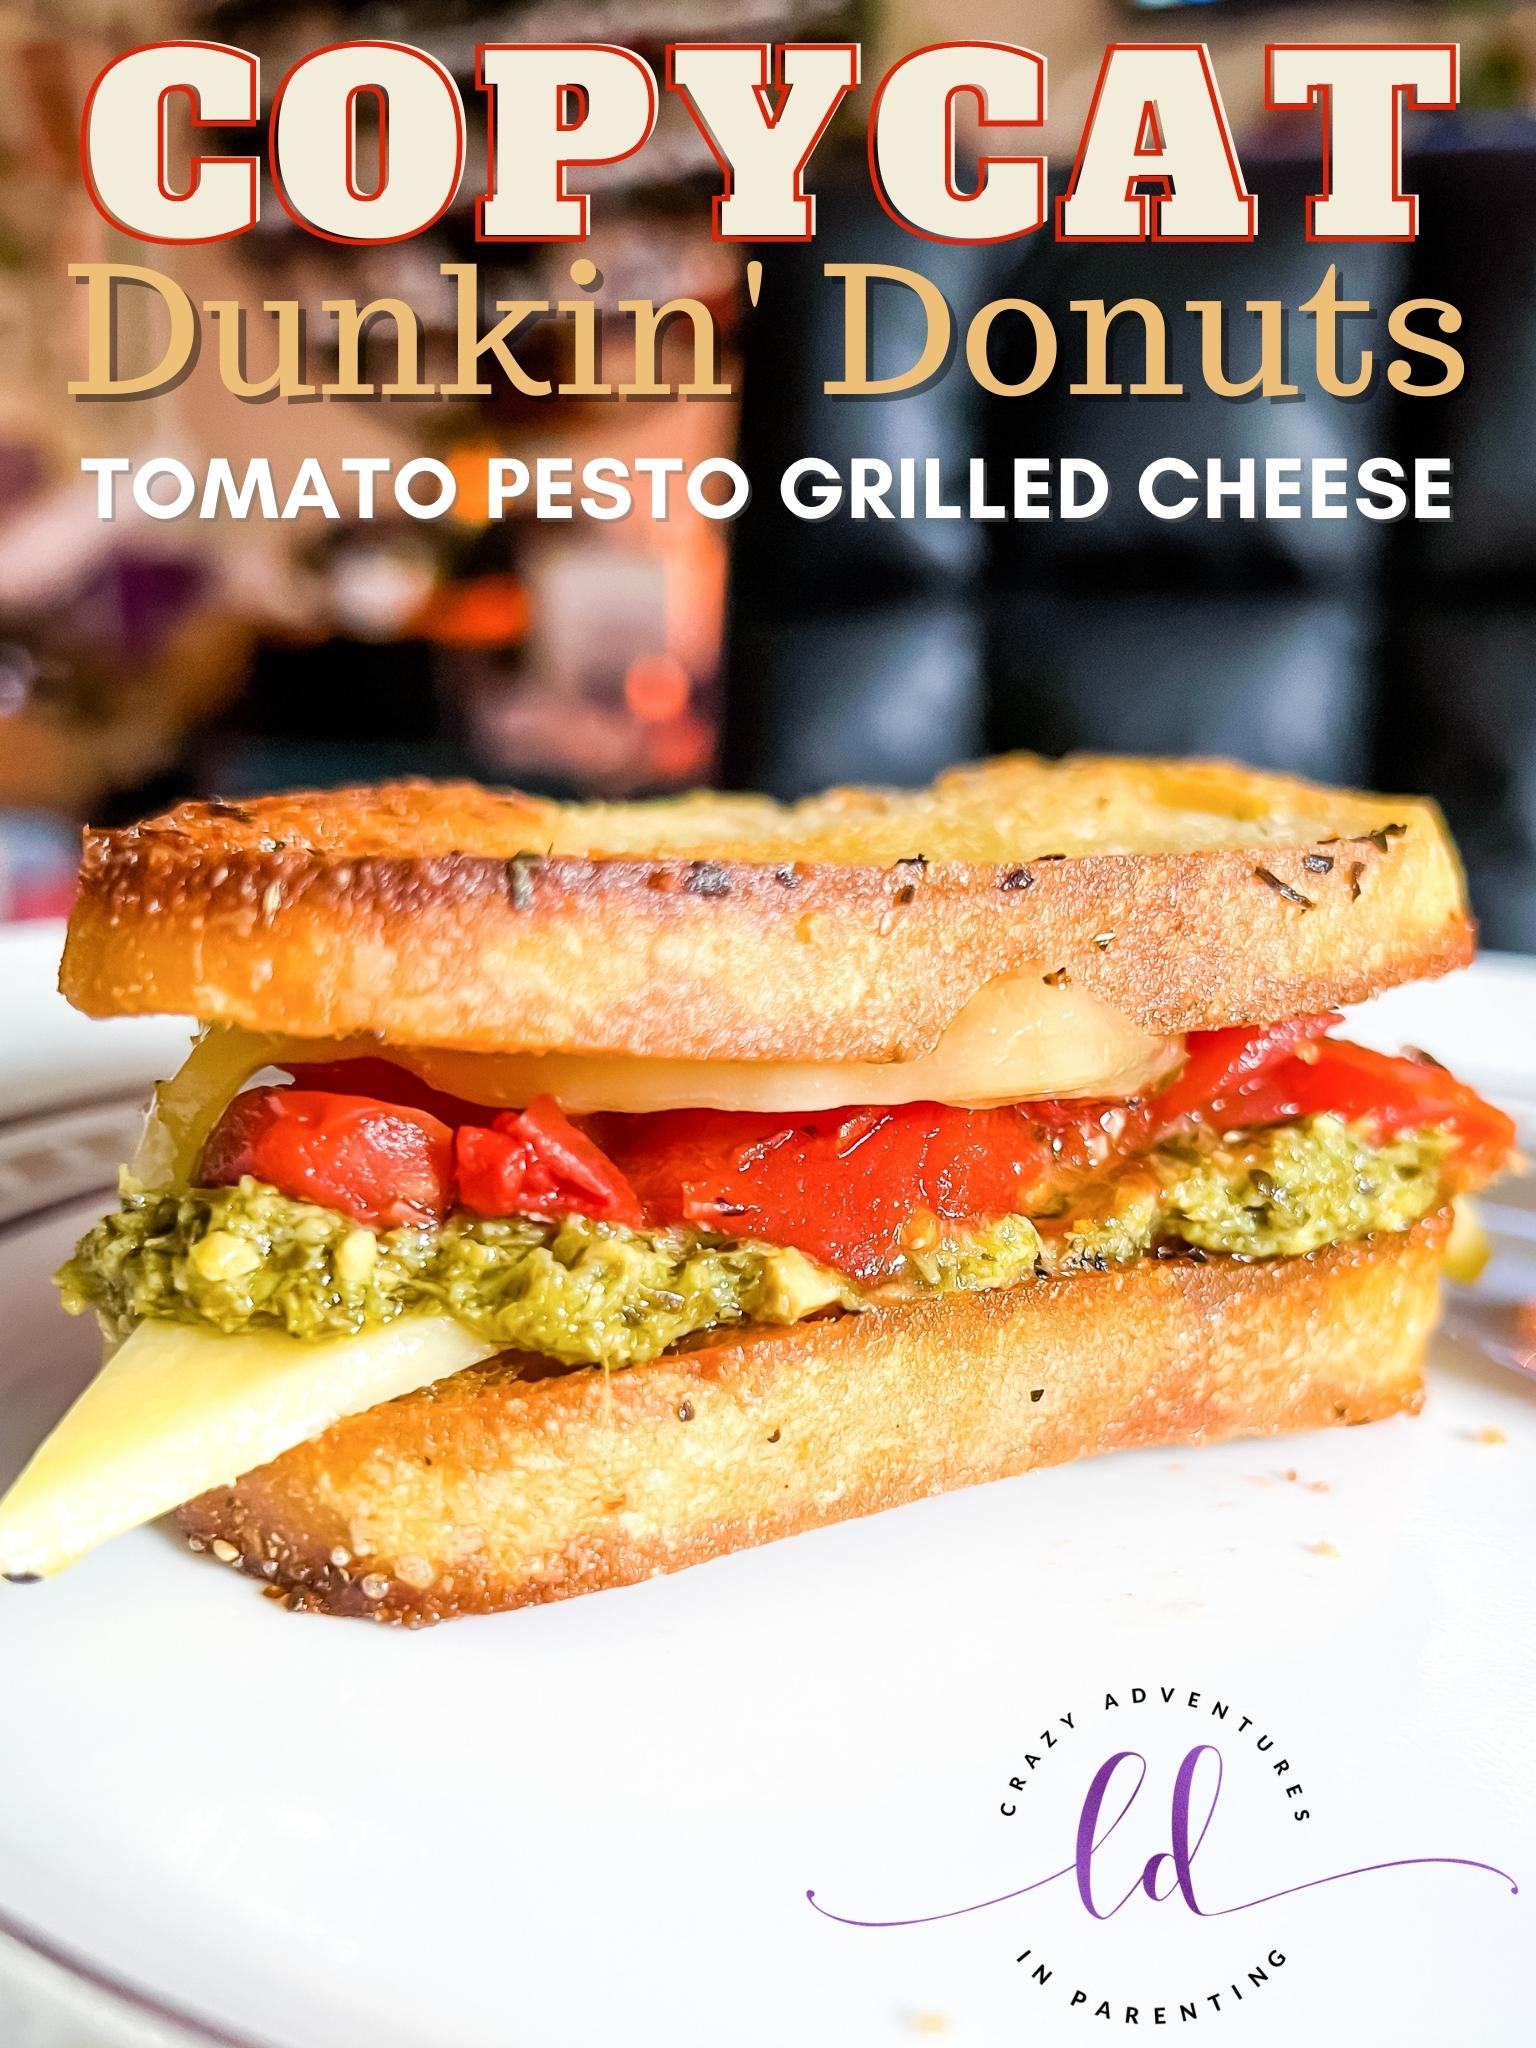 How to Make Dunkin’s Tomato Pesto Grilled Cheese Sandwich – Copycat Recipe